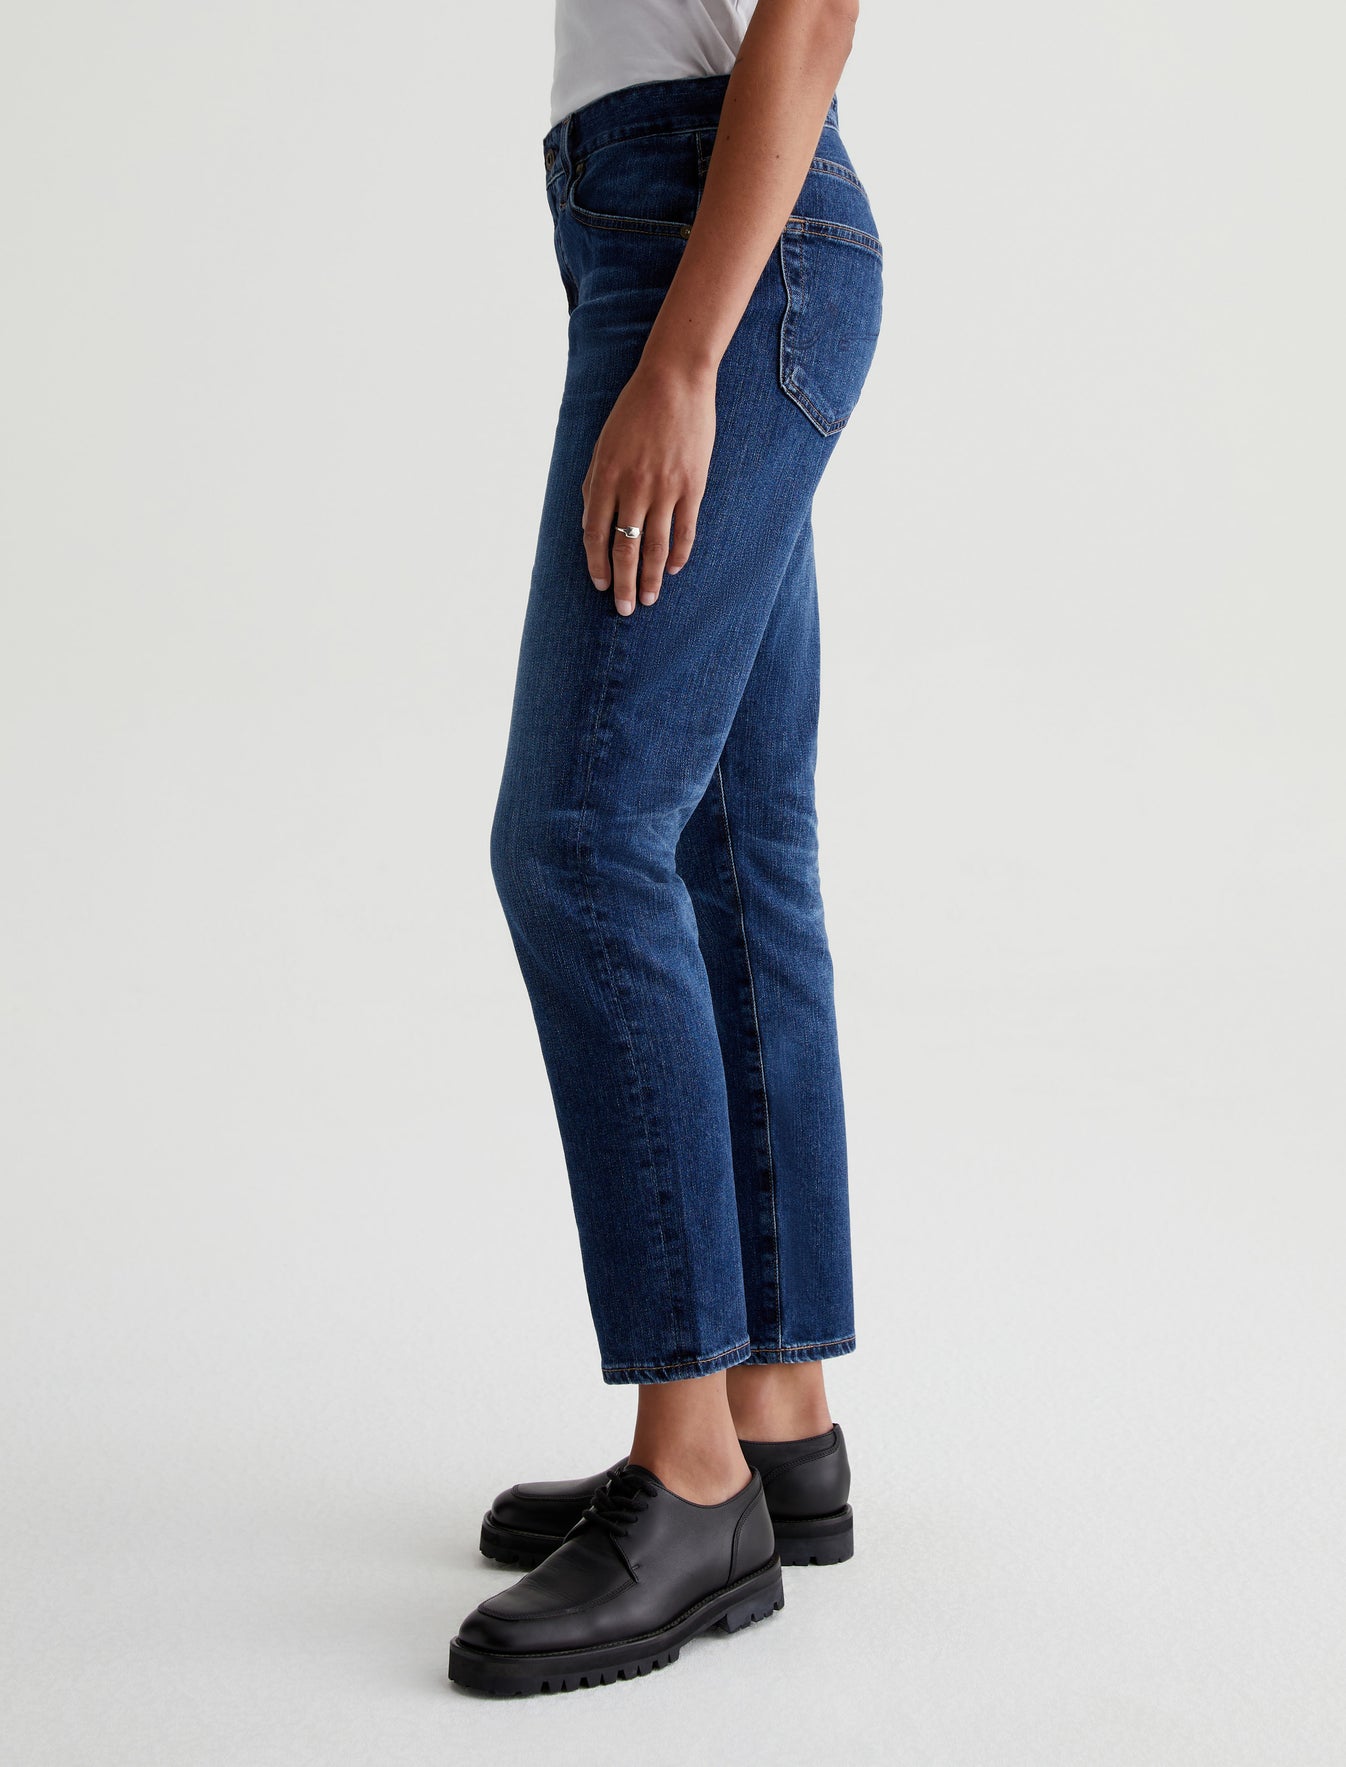 The Ex-Girlfriend Jean is Now a Thing, As More and More Men Start Shopping  the Women's Section